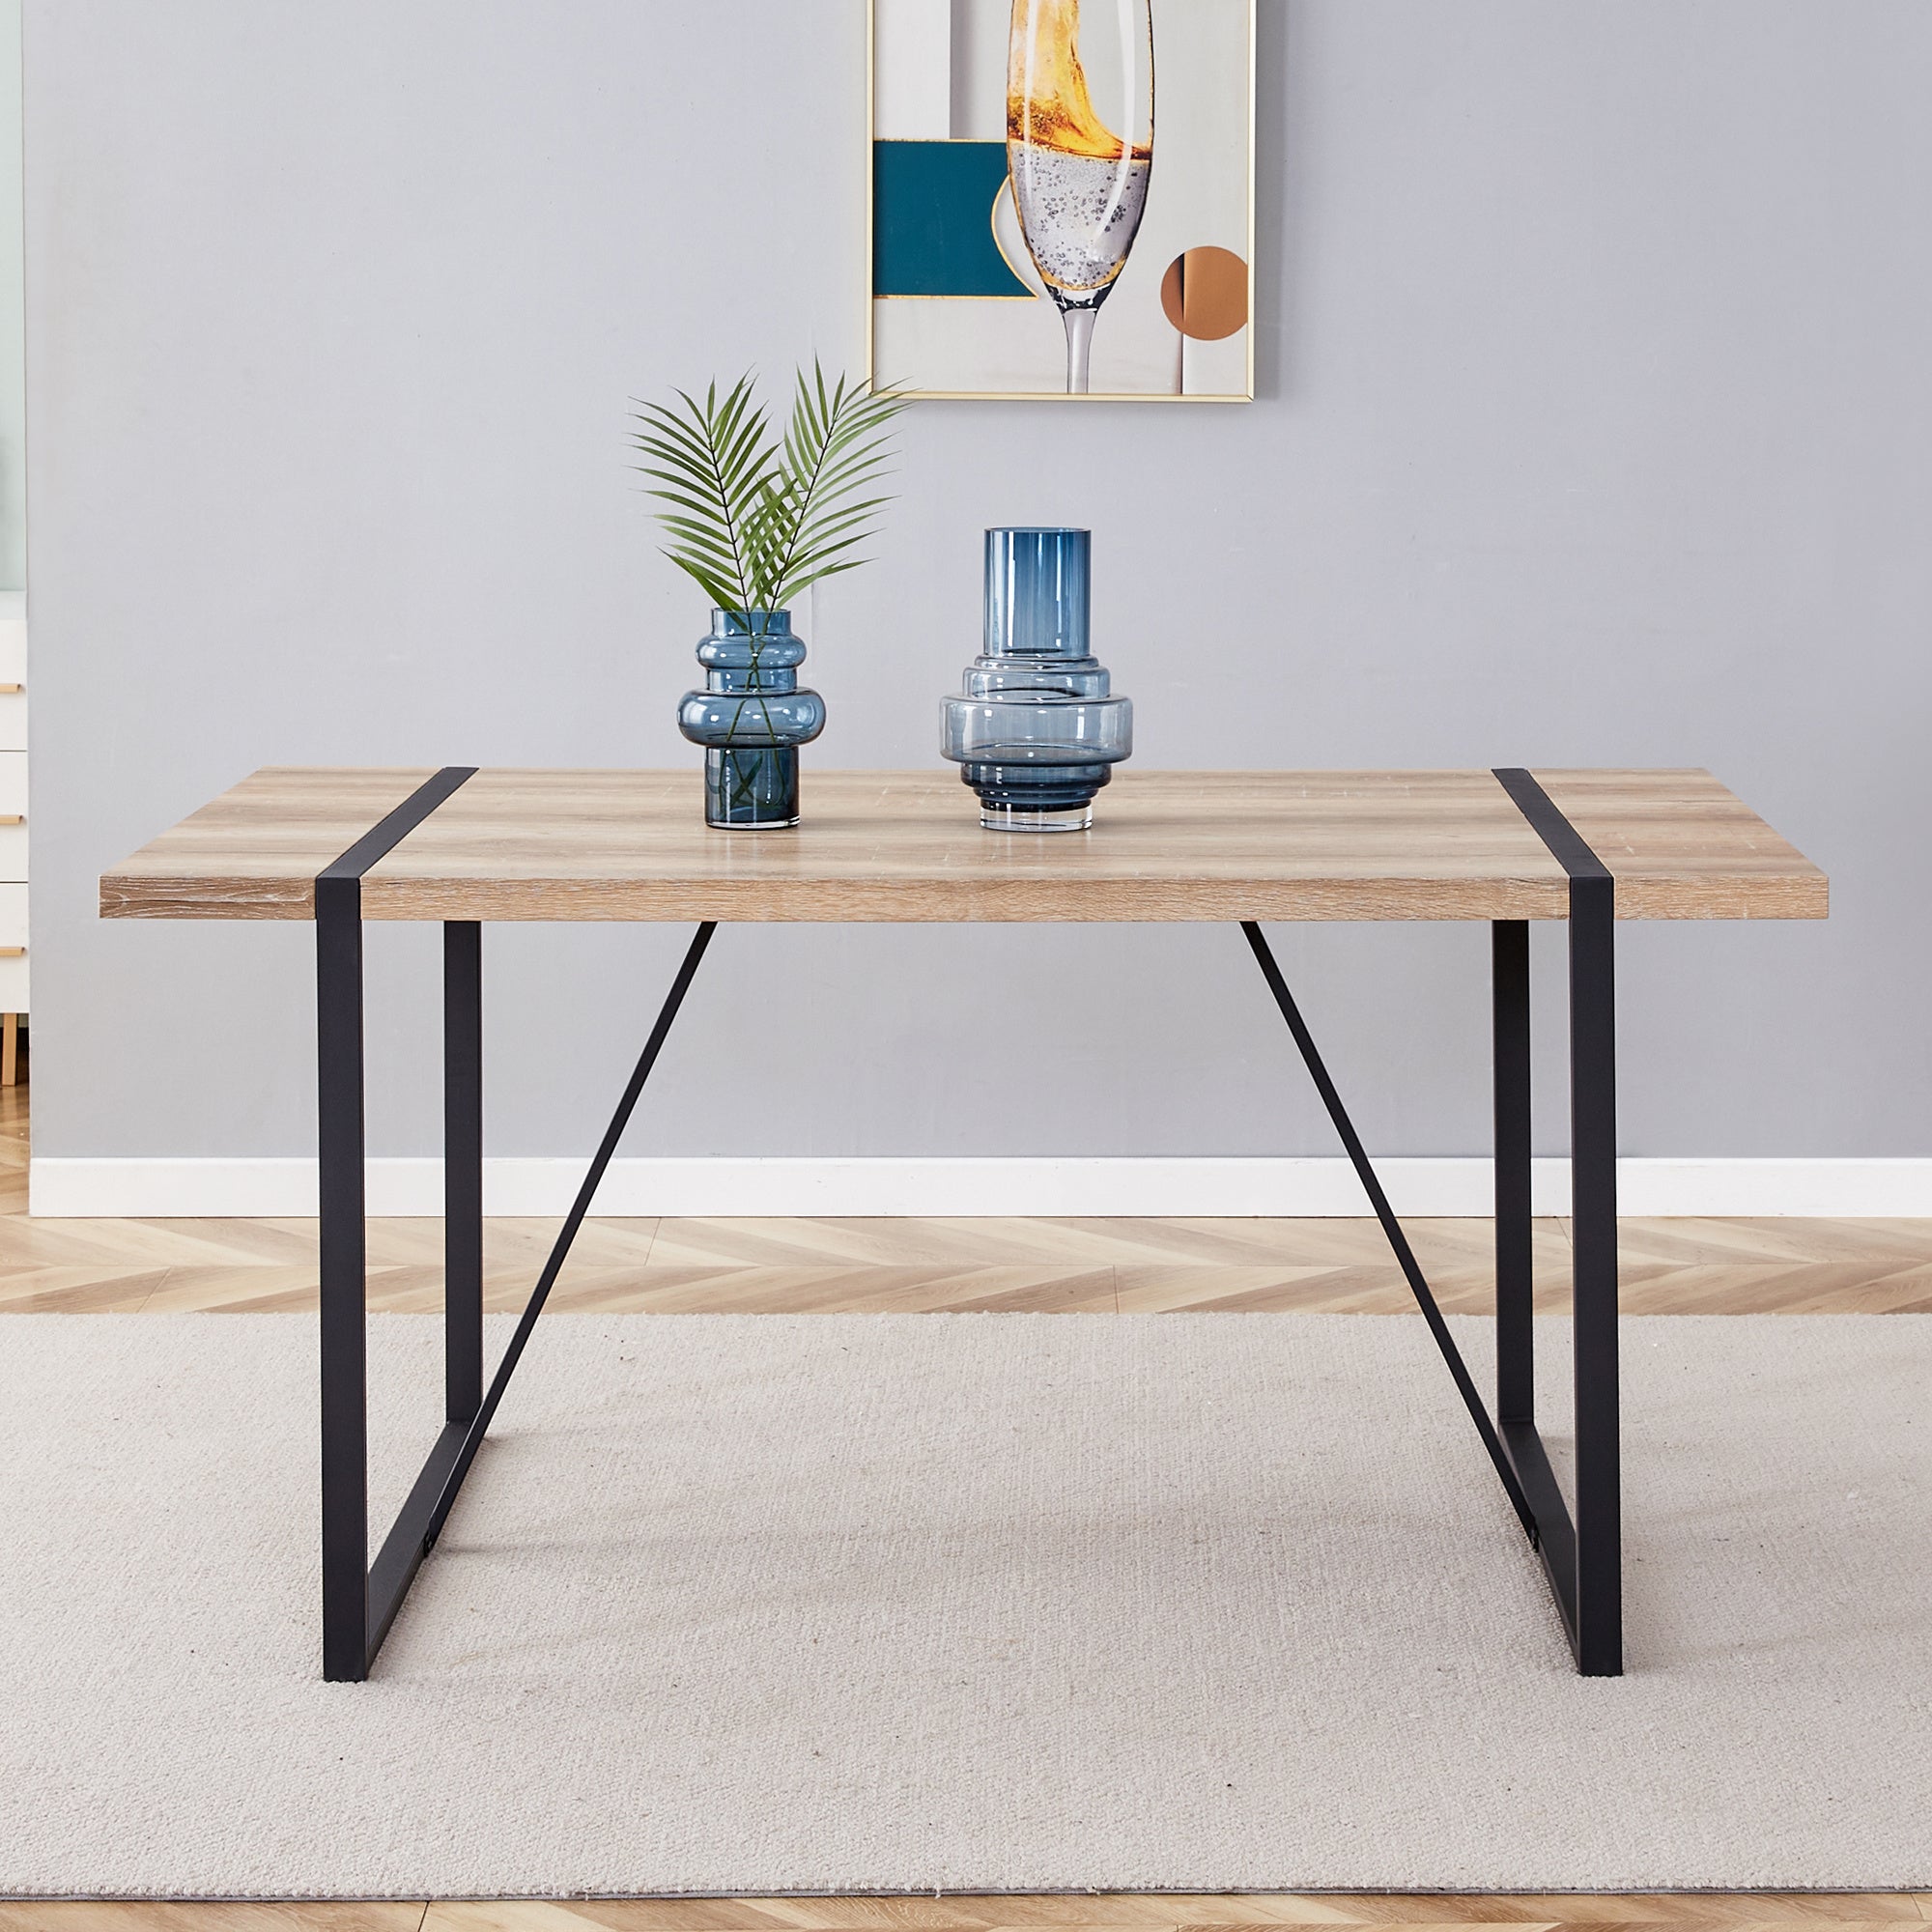 Rustic Industrial Rectangular Wood Dining Table For 4-6 Person, With 1.5" Thick Engineered Wood Tabletop and Black Metal Legs, Writing Desk For Kitchen Dining Living Room, 63" W x 35.4" D x 29.92" H